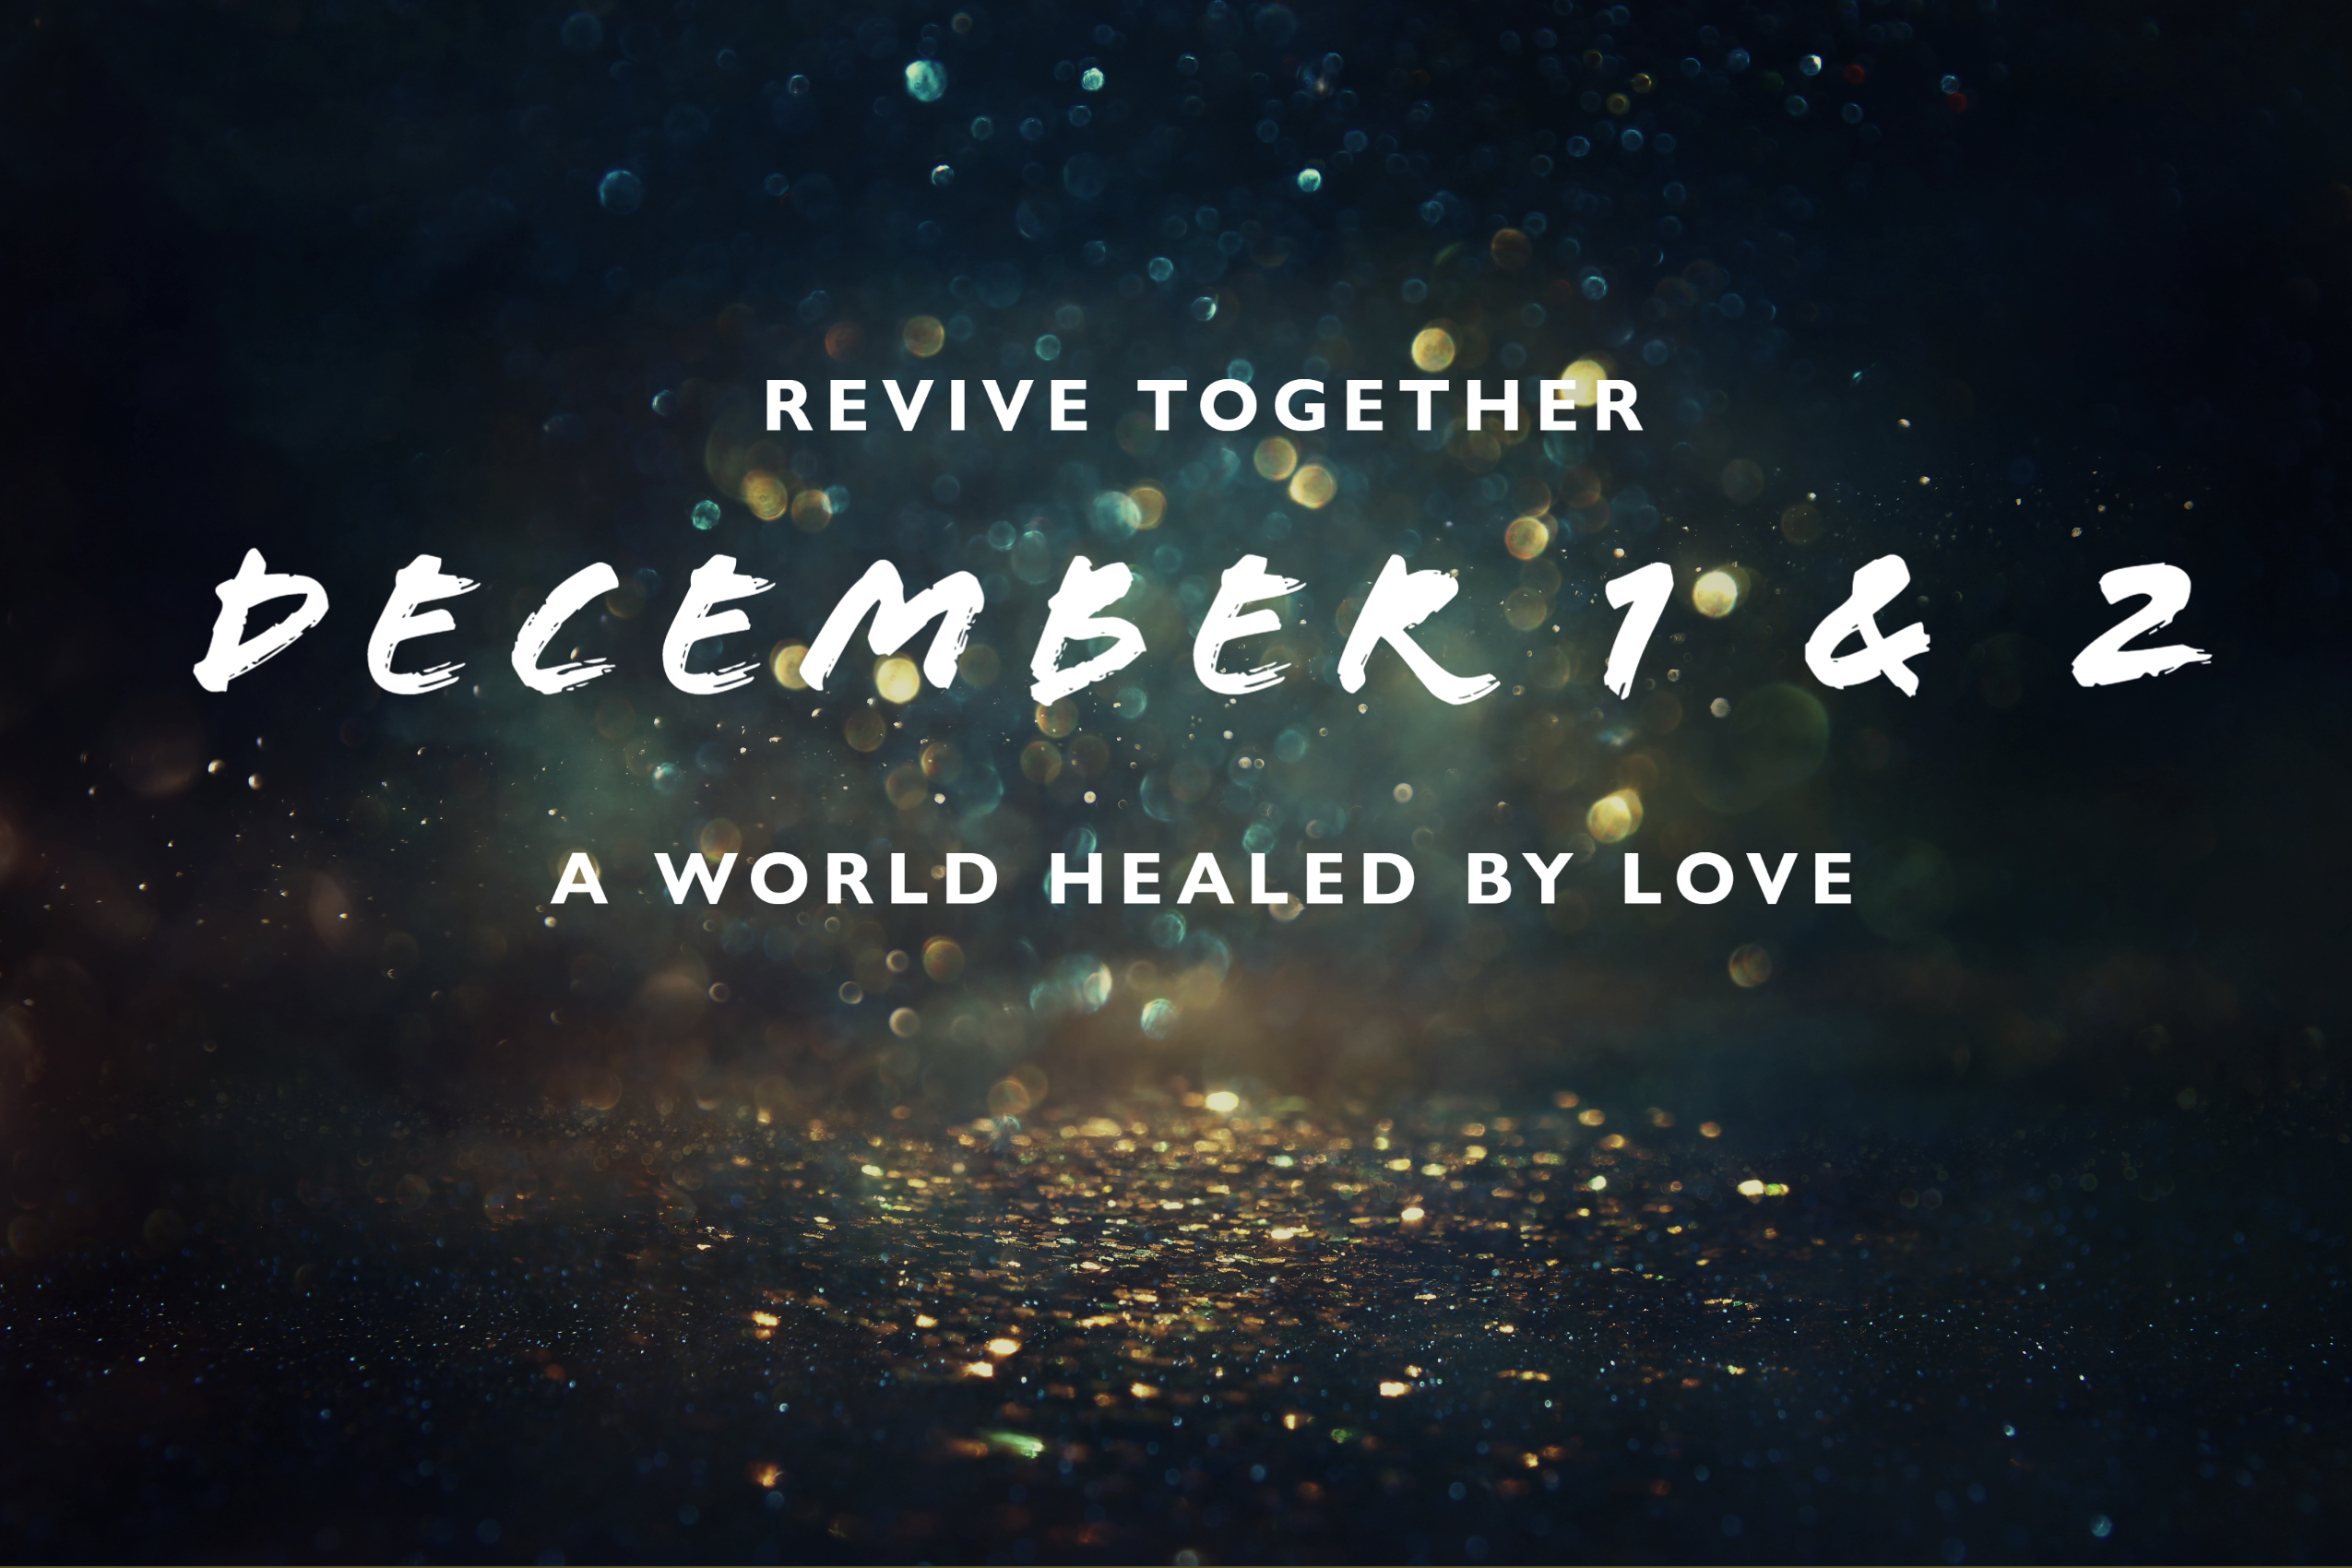 A dark background with falling bokeh lights. In the foreground it reads, "REVIVE TOGETHER - DECEMBER 1 & 2 - A WORLD HEALED BY LOVE"